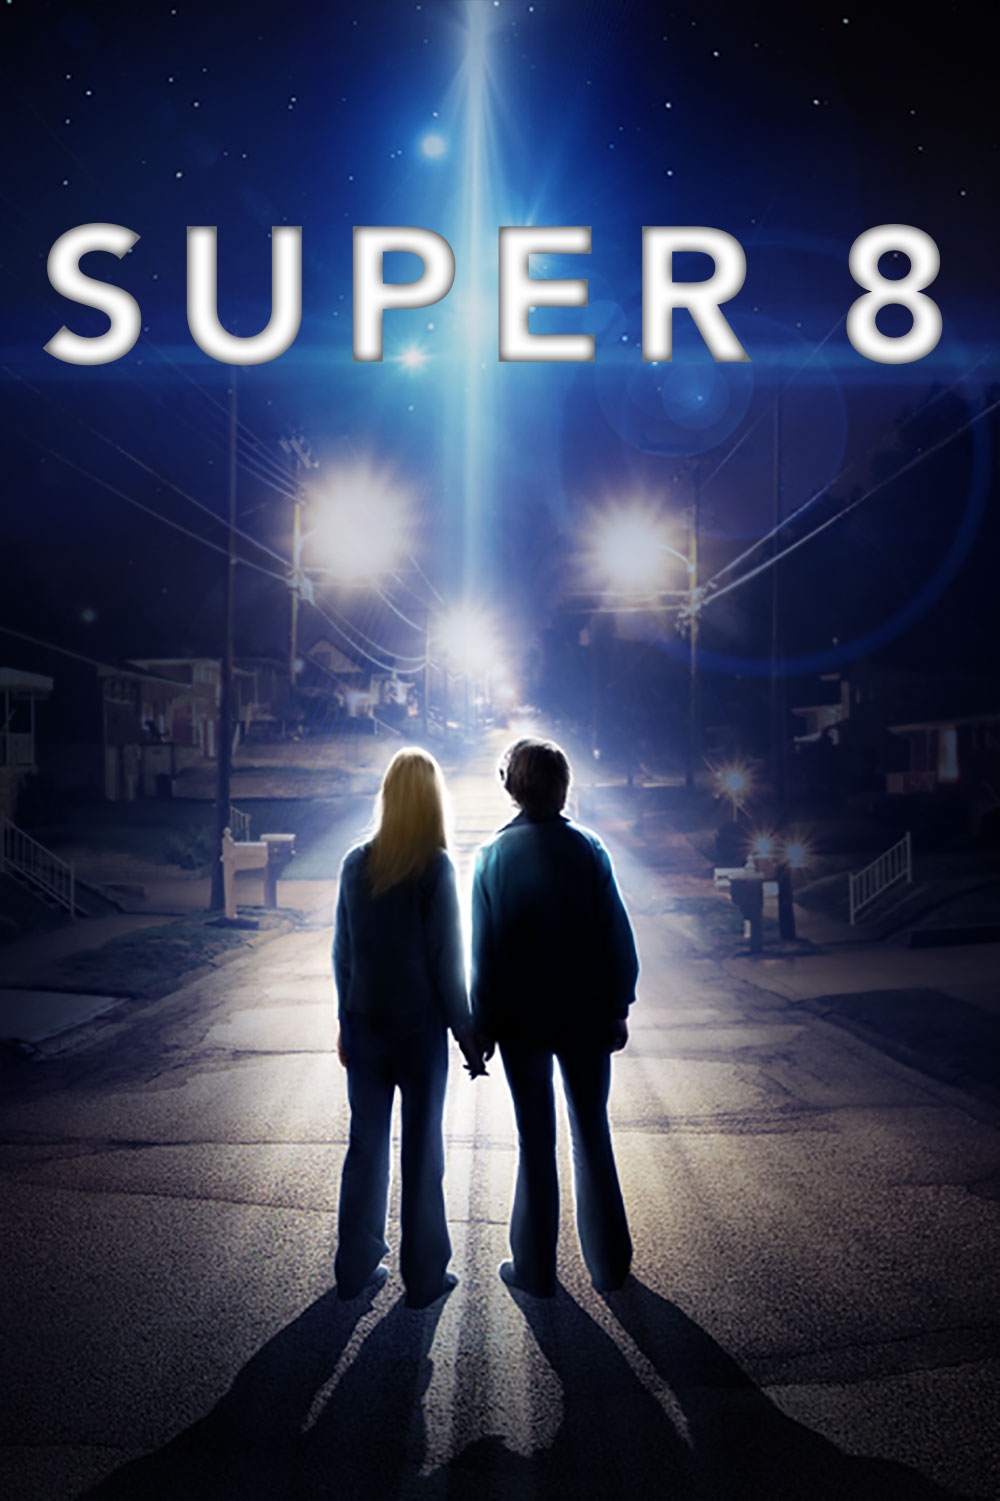 Super 8 (2011) - About the Movie